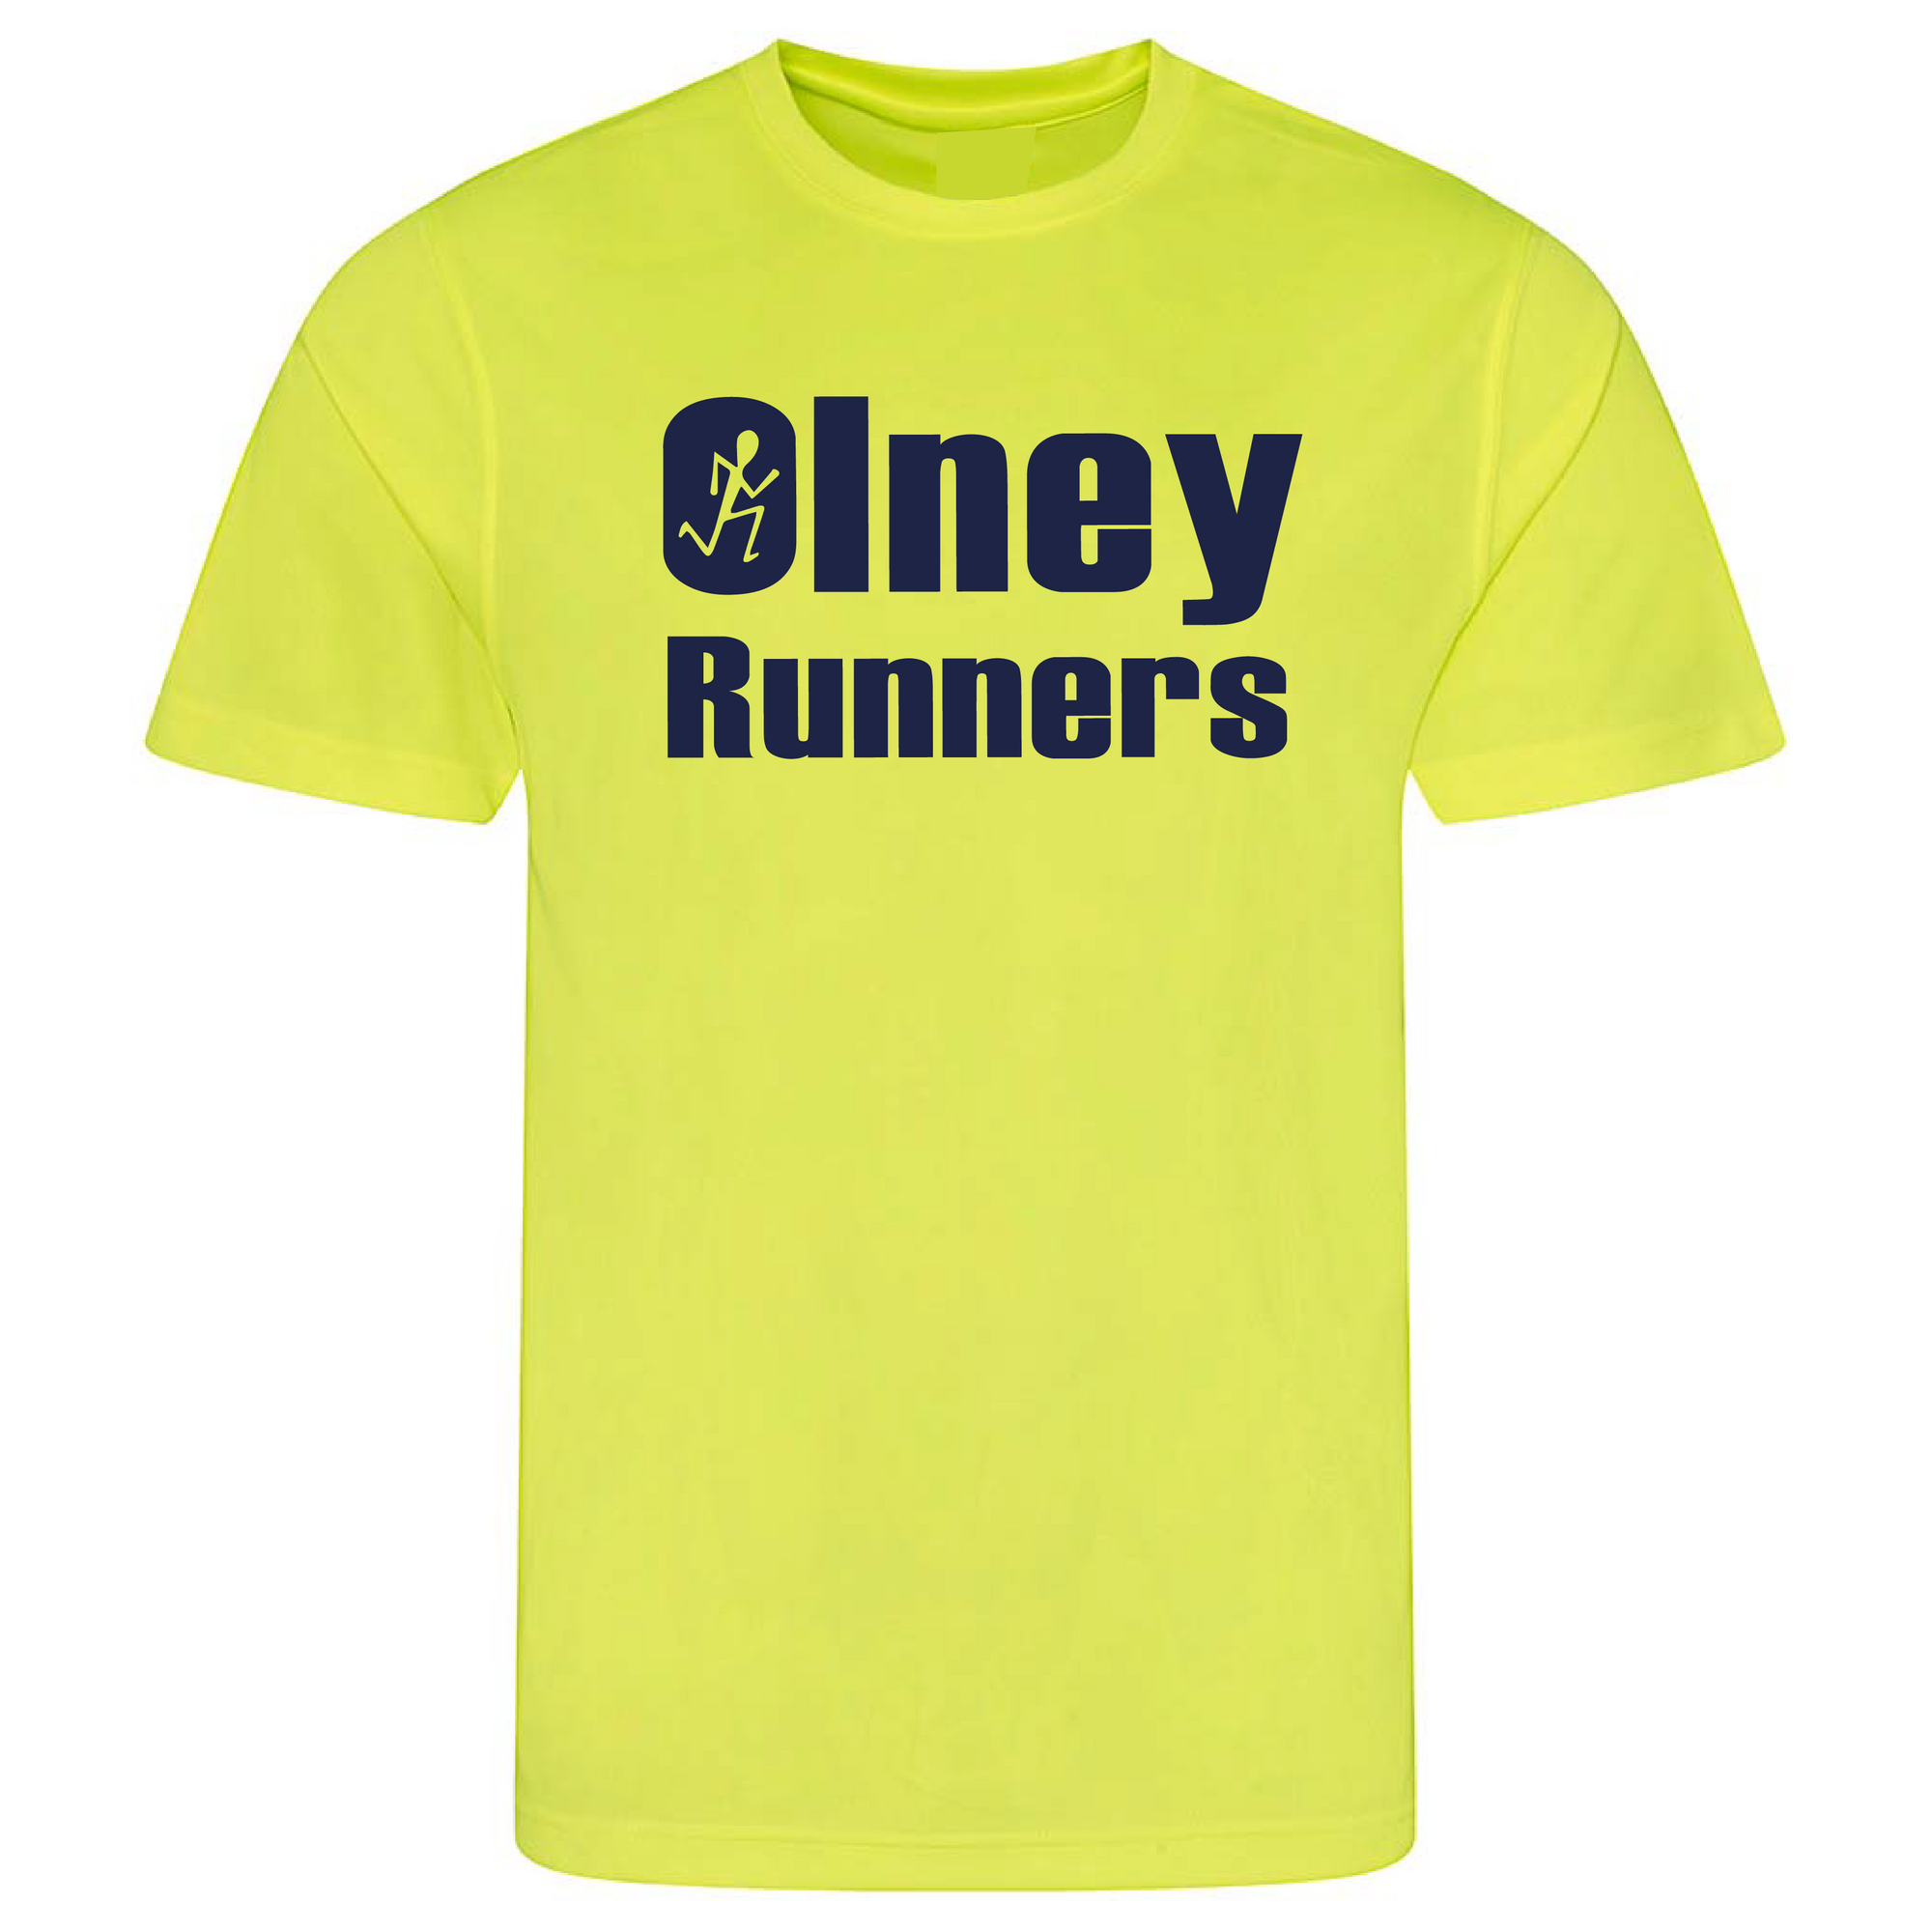 Olney Runners Childrens Technical Training T-shirt - Electric yellow